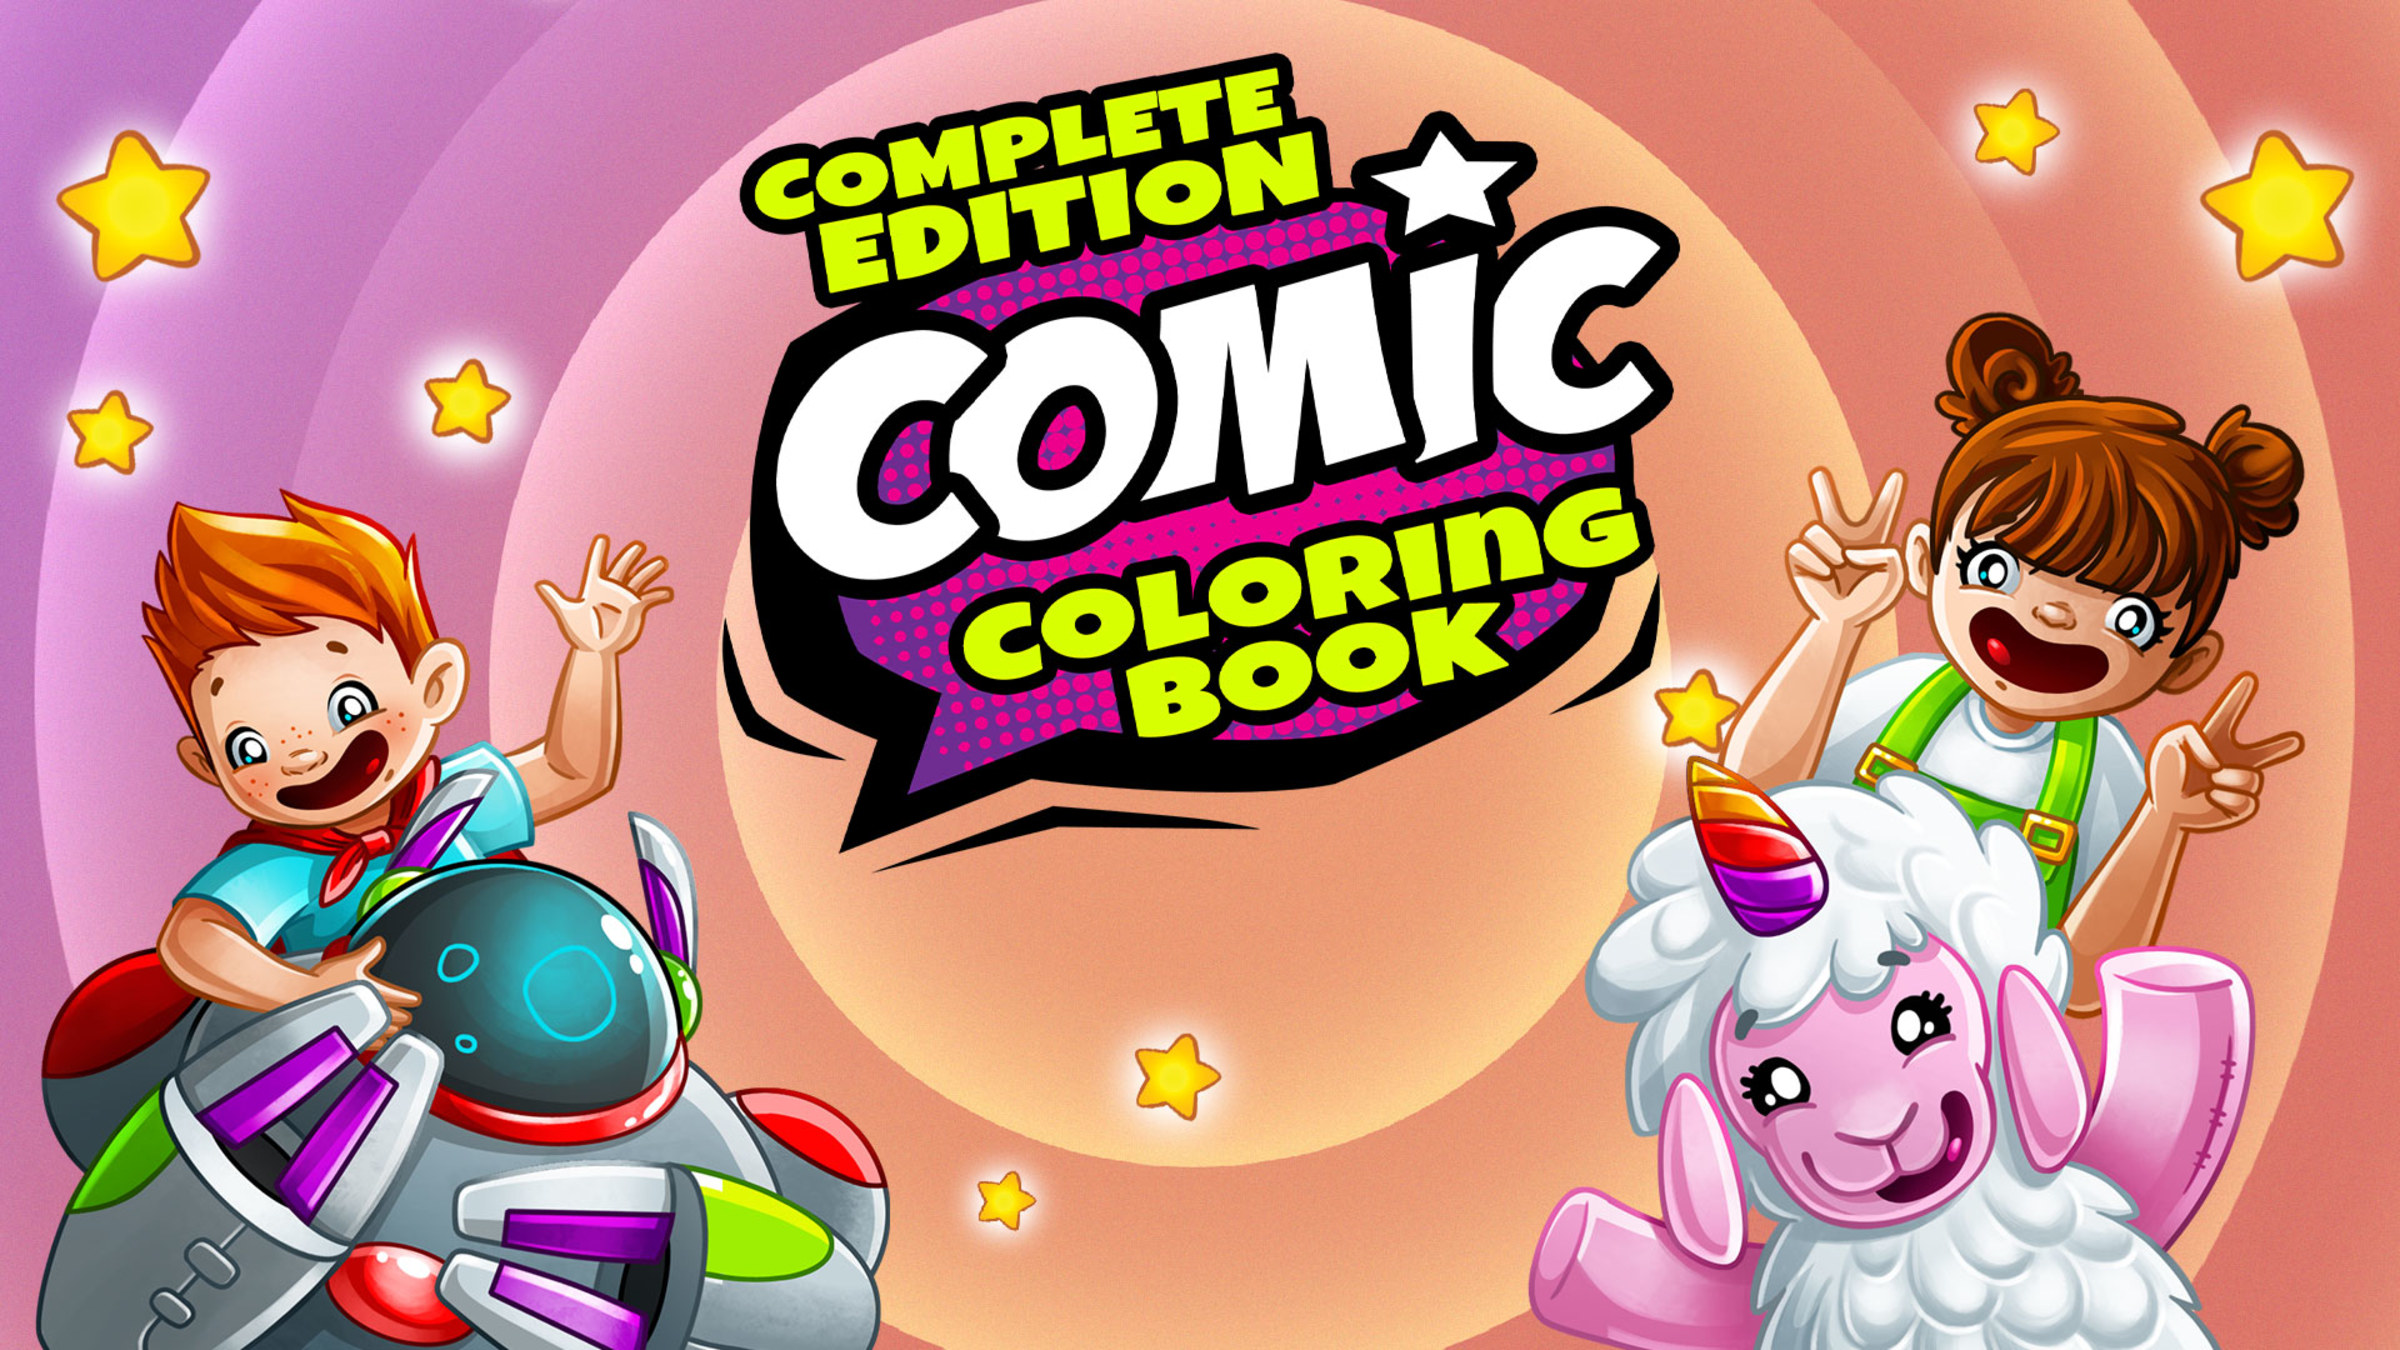 Comic Coloring Book - Complete Edition for Nintendo Switch - Nintendo